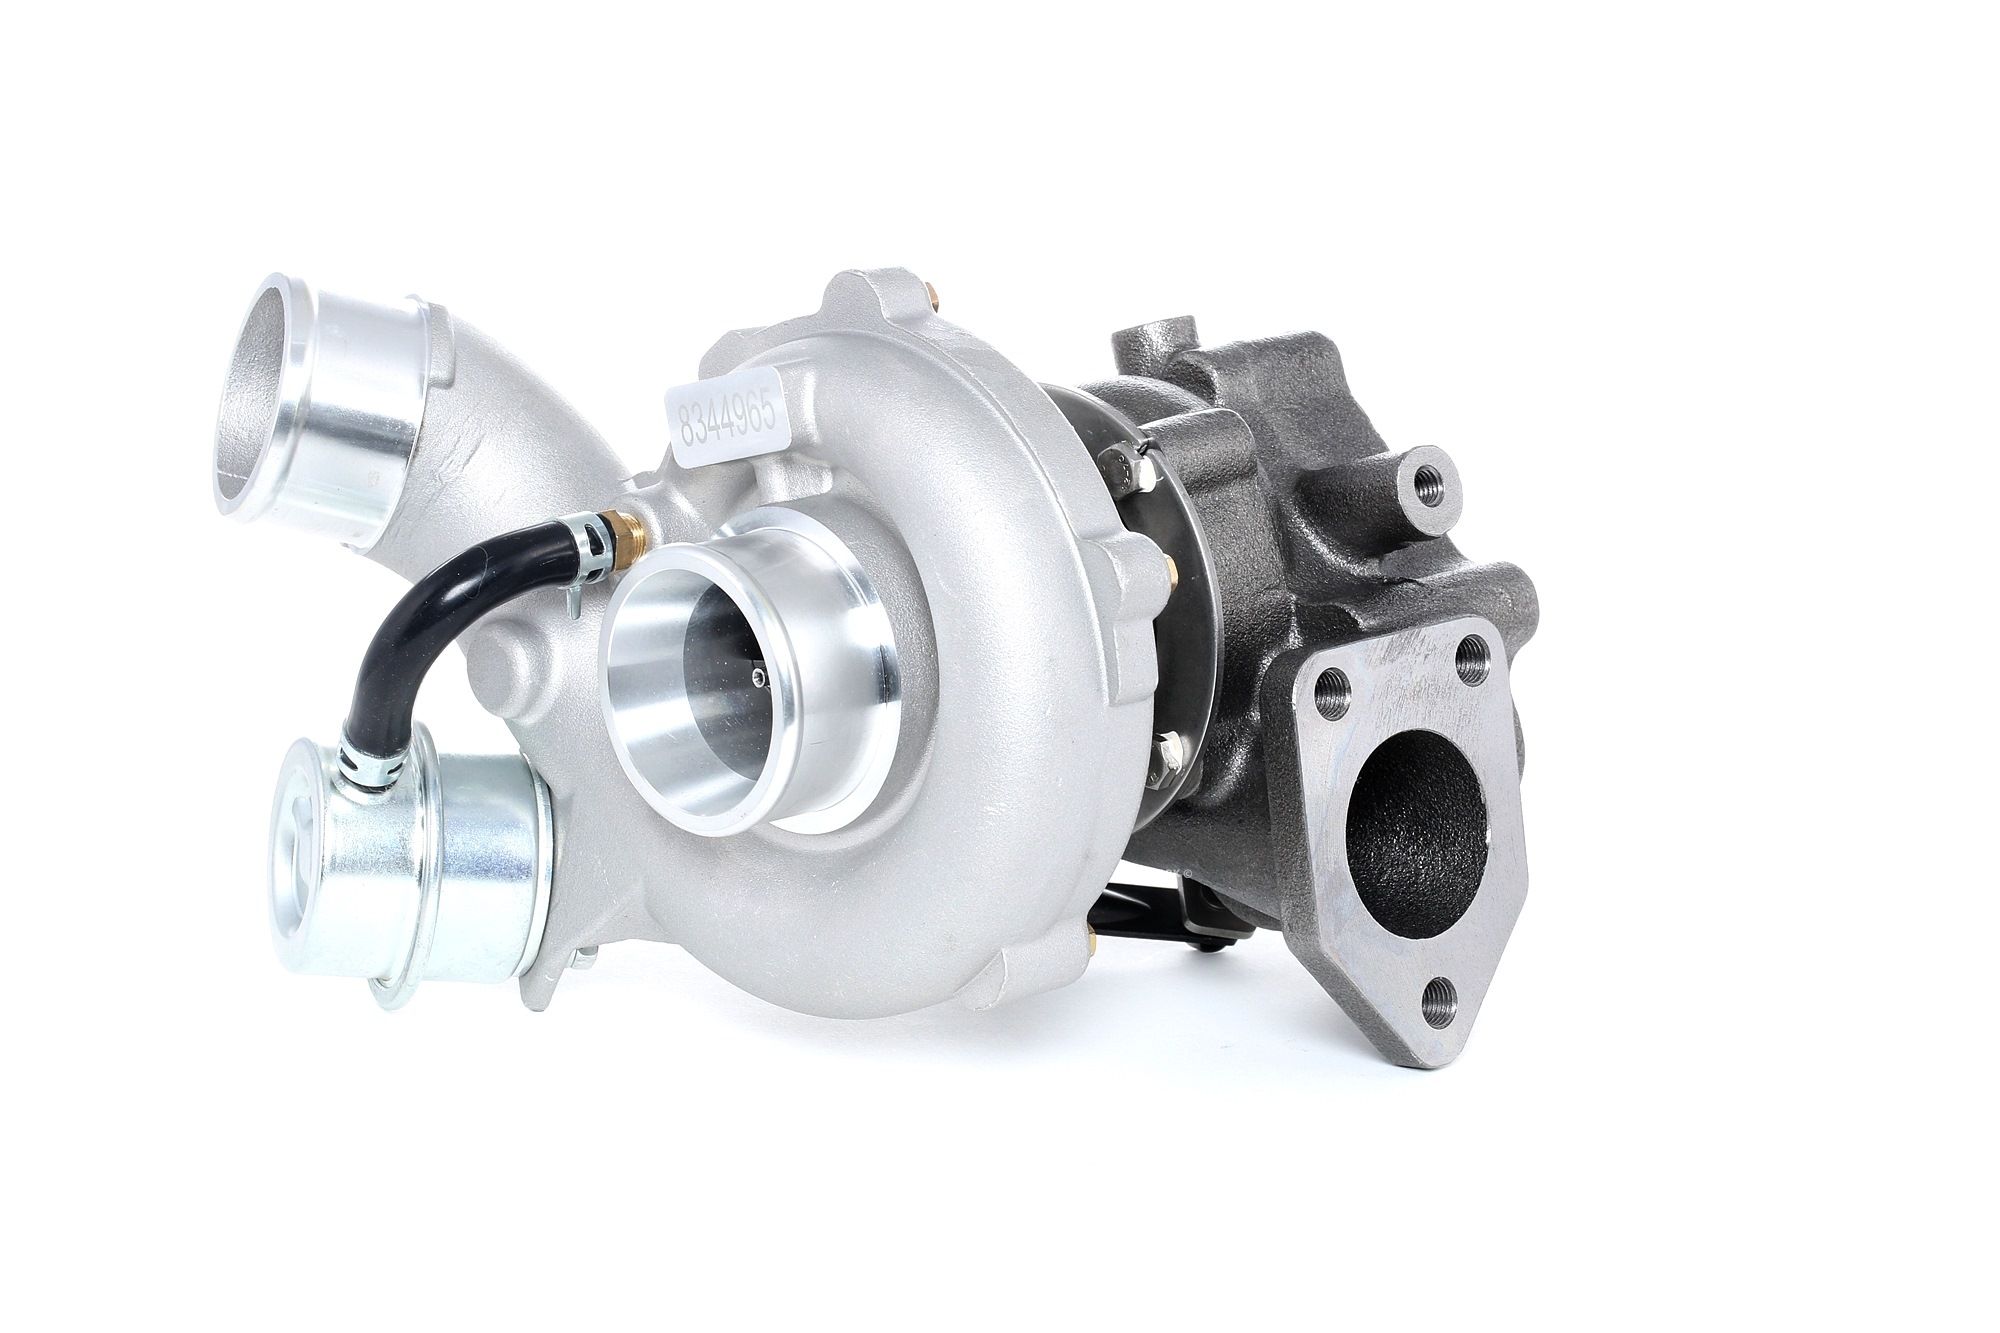 SKCT-1190003 STARK Turbocharger KIA Exhaust Turbocharger, Diesel, Euro 4 (D4), Vacuum-controlled, without gaskets/seals